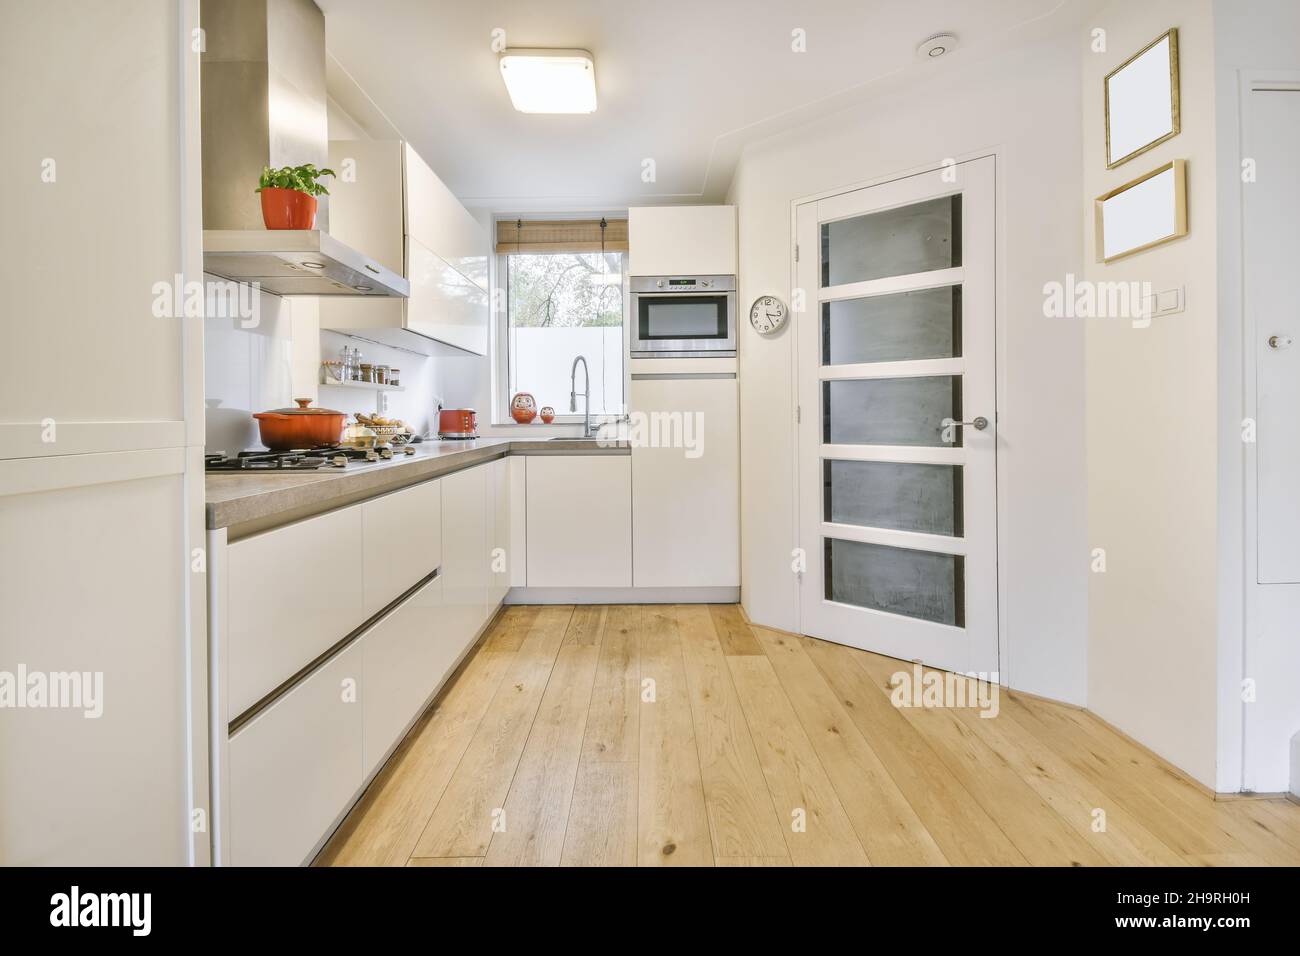 Cozy daylight kitchen with white cabinets and hardwood floors Stock Photo